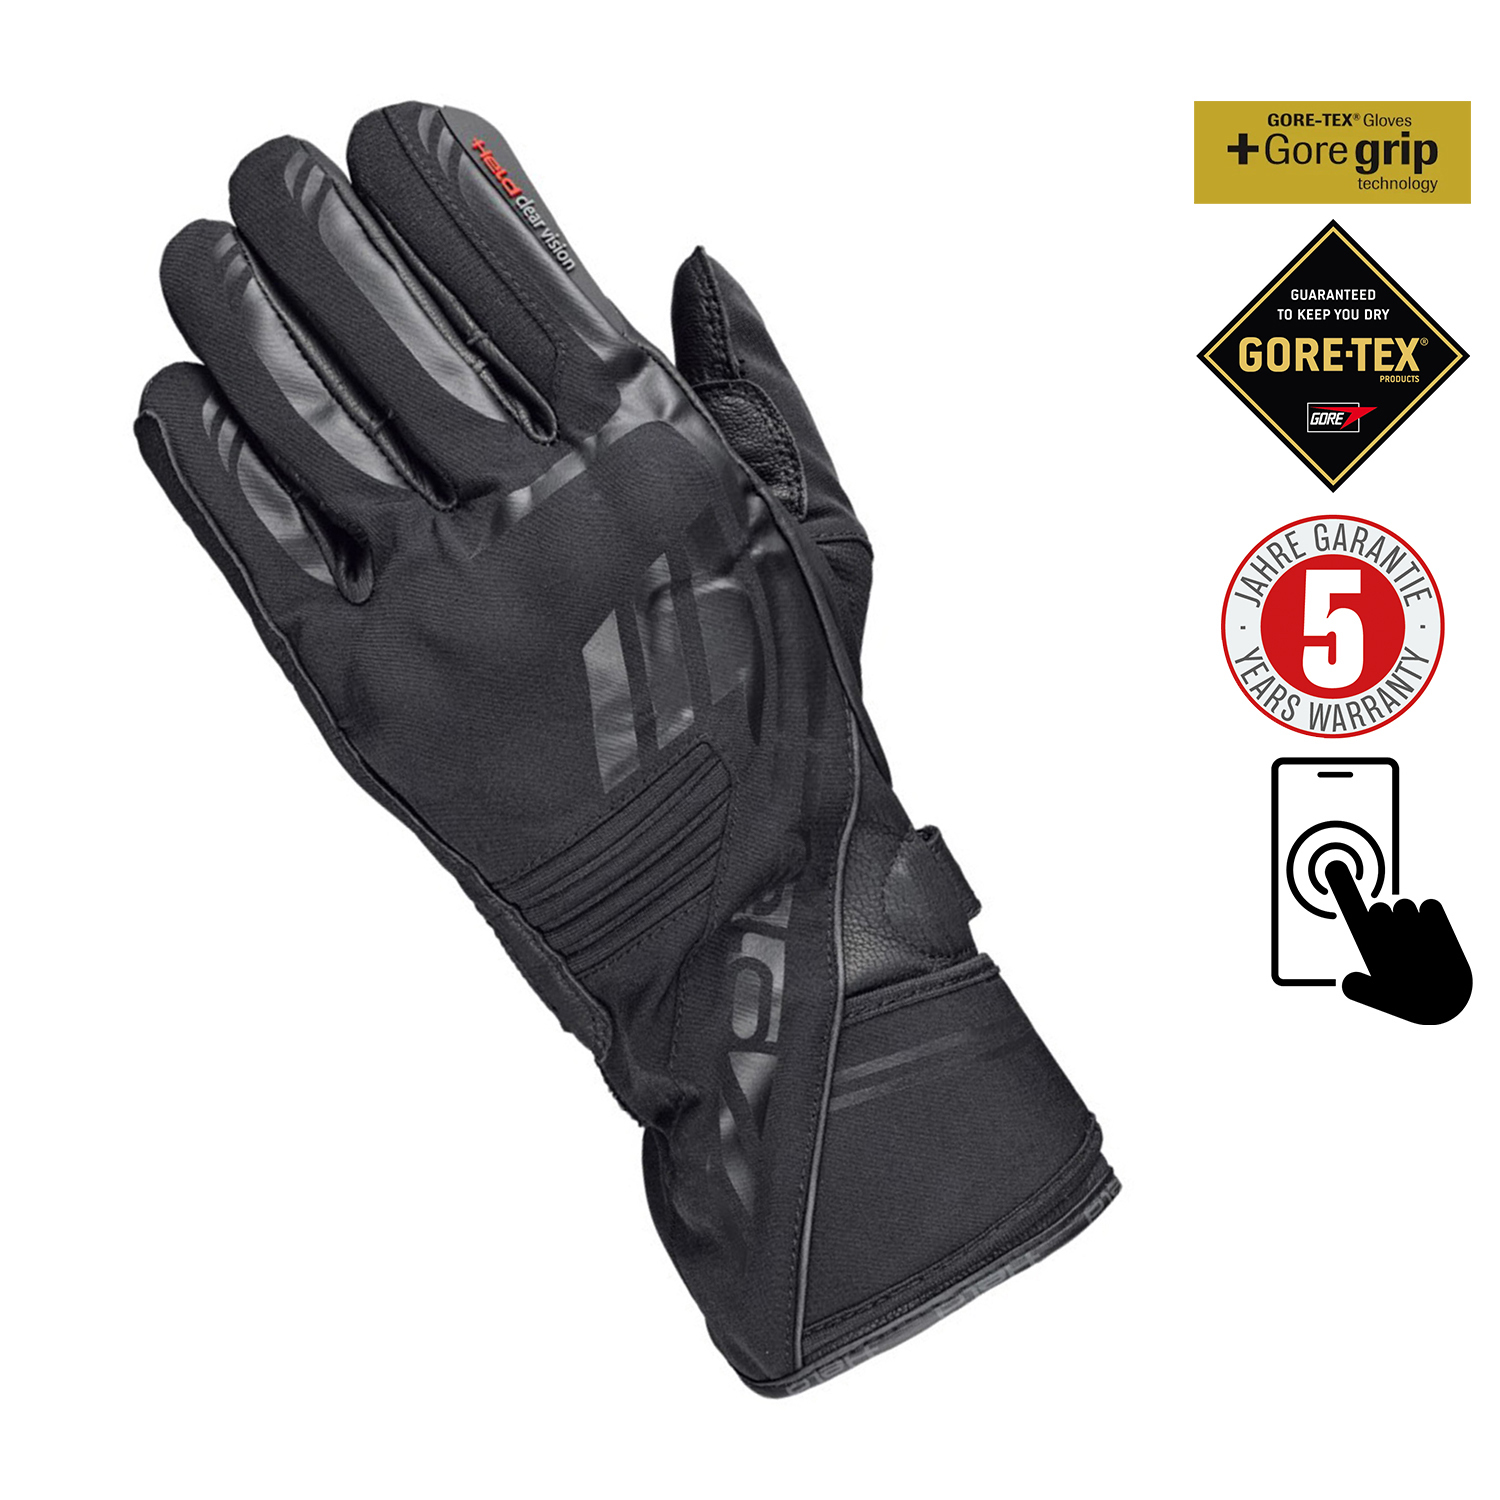 Held Seric Gloves - Available in Various Sizes